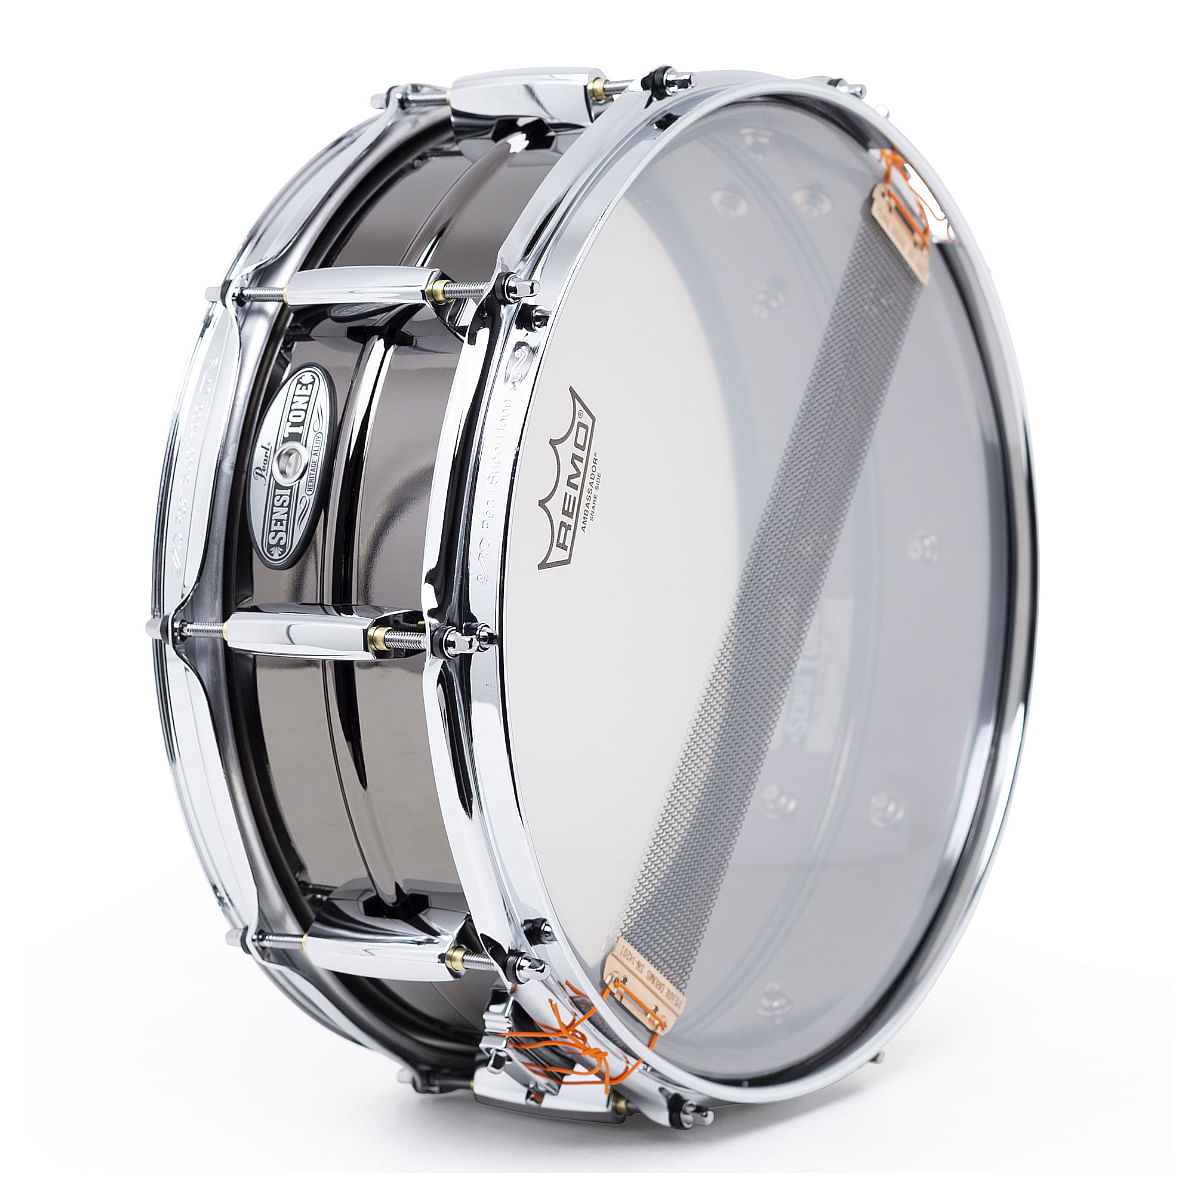 Pearl, Snare Drum, Sensitone Heritage Alloy Brass Shell, 14(35.56cm) x  5(12.70cm) STH1450BR